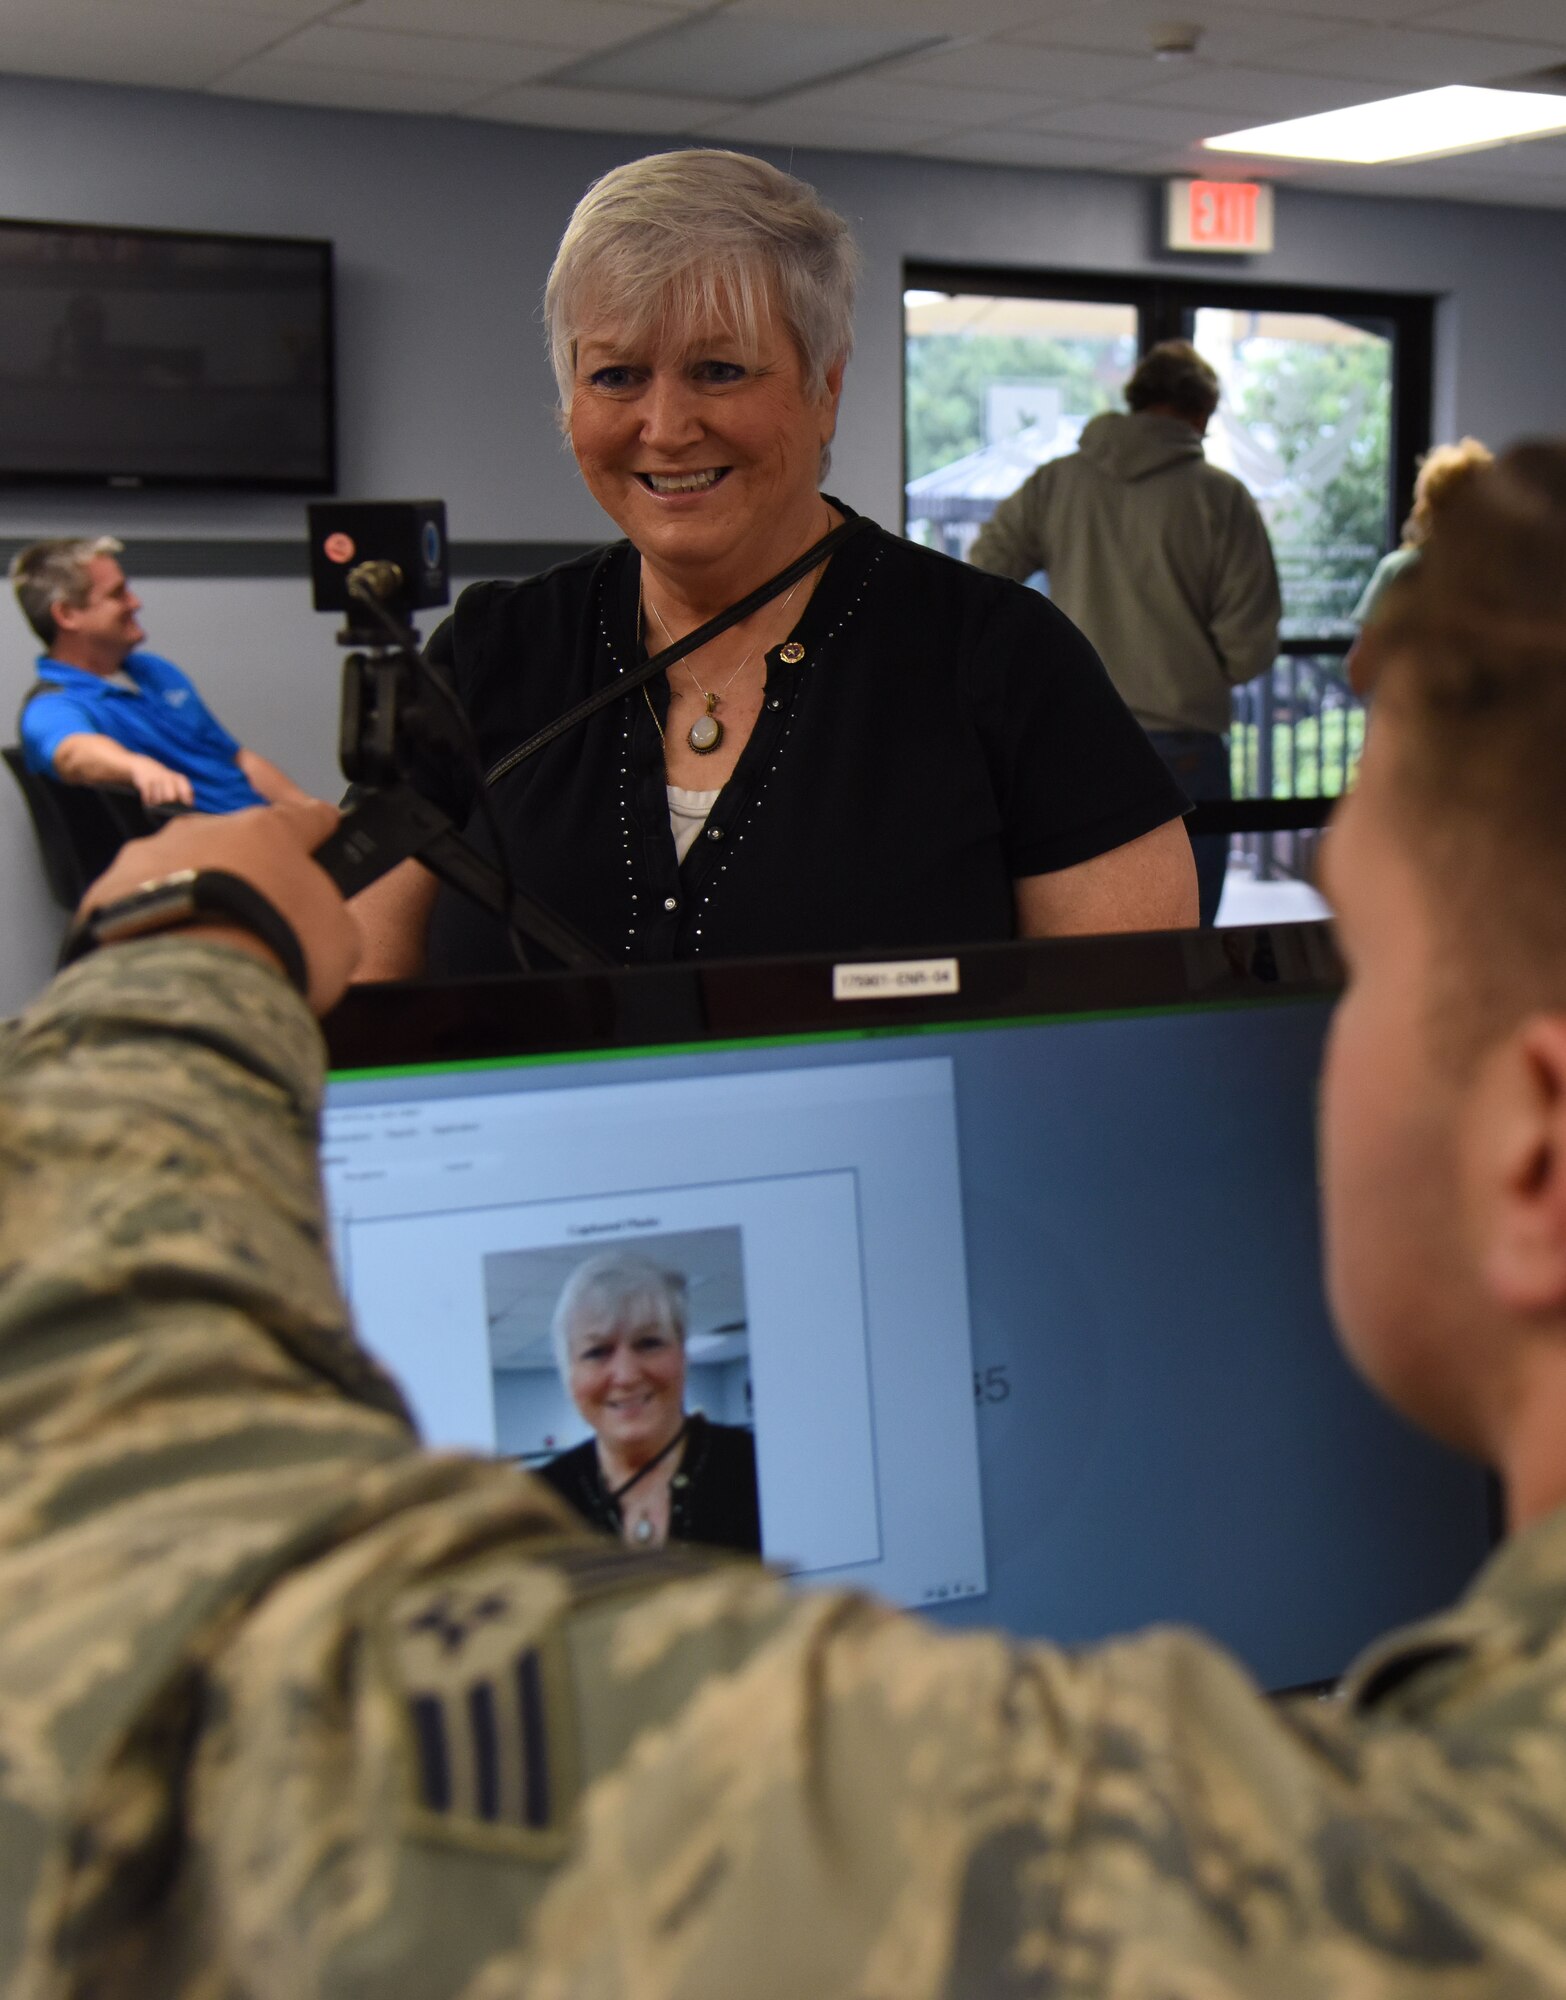 Senior Airman Matias Acuna, 81st Security Forces Squadron visitors center clerk, takes a photo of Nora Moore for her Gold Star Family Member ID card at the visitor center Aug. 29, 2017, on Keesler Air Force Base, Mississippi. As a surviving daughter of a missing in action service member, Moore is allowed to obtain an ID card for recognition and installation access so that she can attend events and access A&FRC referral services. She is Keesler’s first Gold Star Family Member. (U.S. Air Force photo by Kemberly Groue)